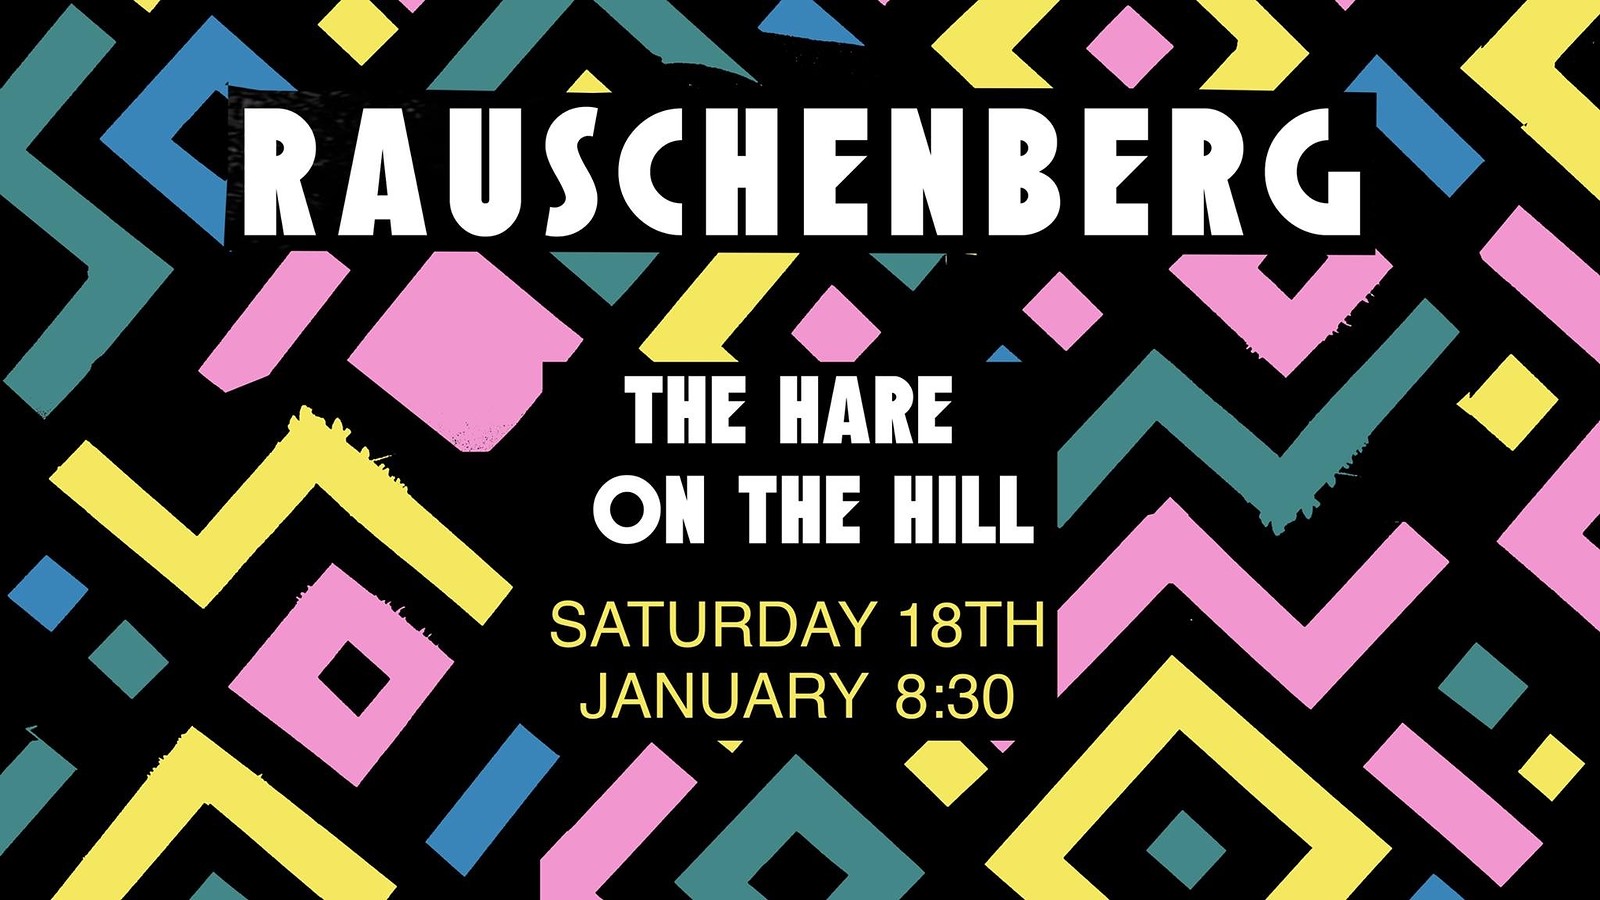 Rauschenberg + DJ Skidmark at The Hare on the Hill